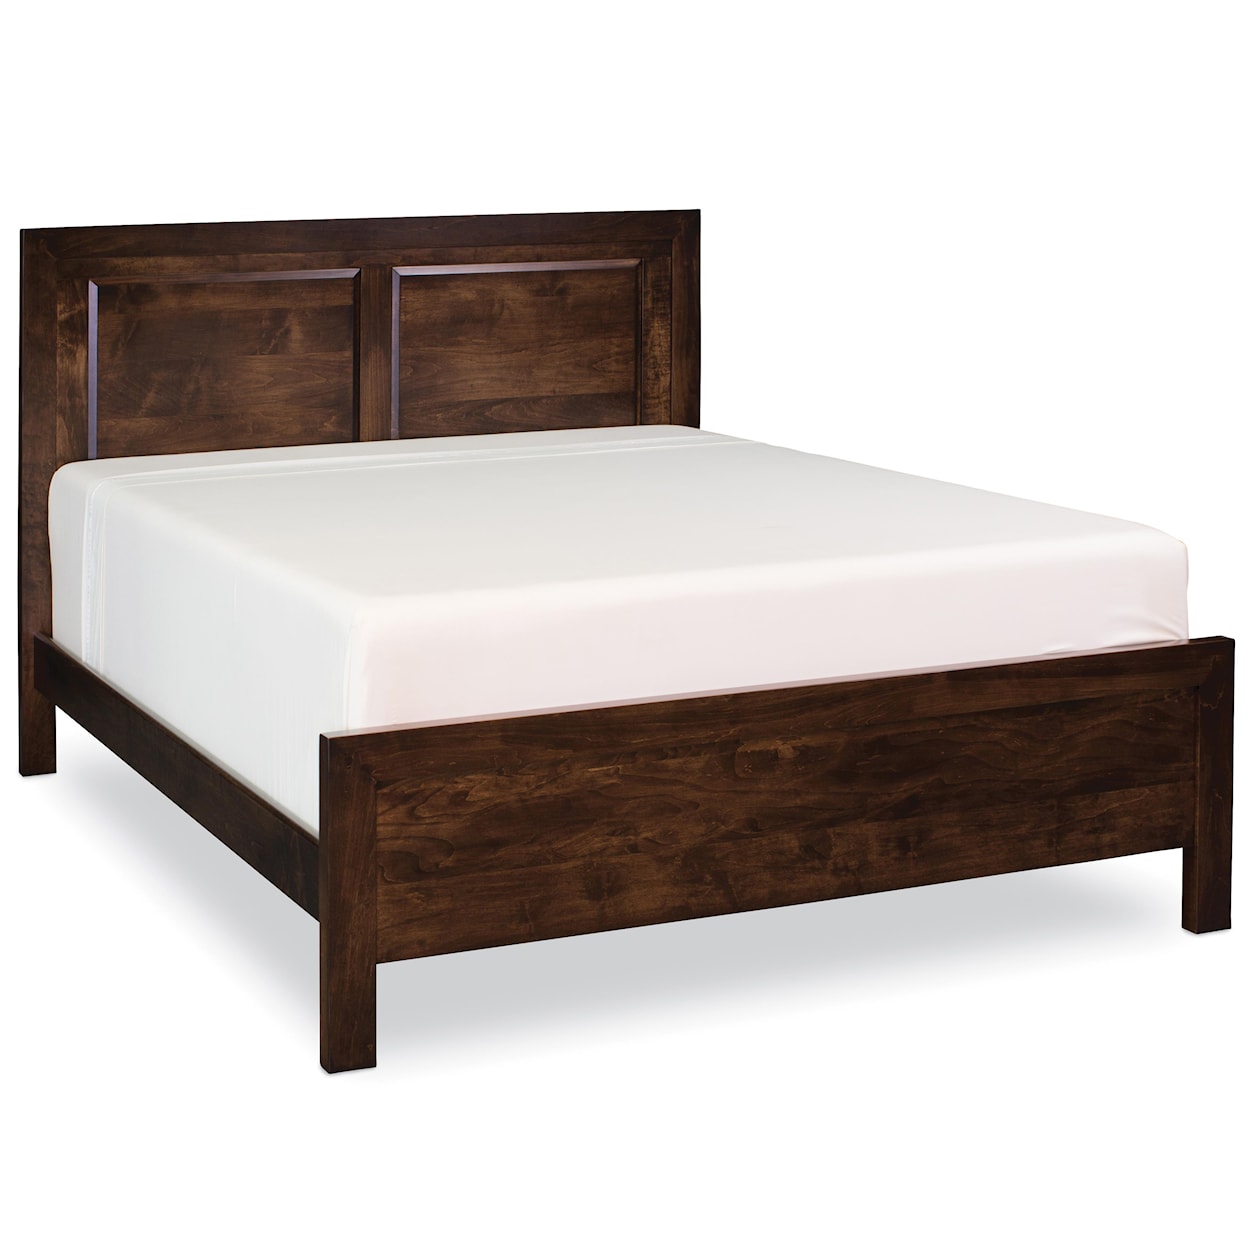 Simply Amish Beaumont SA Queen Panel Bed